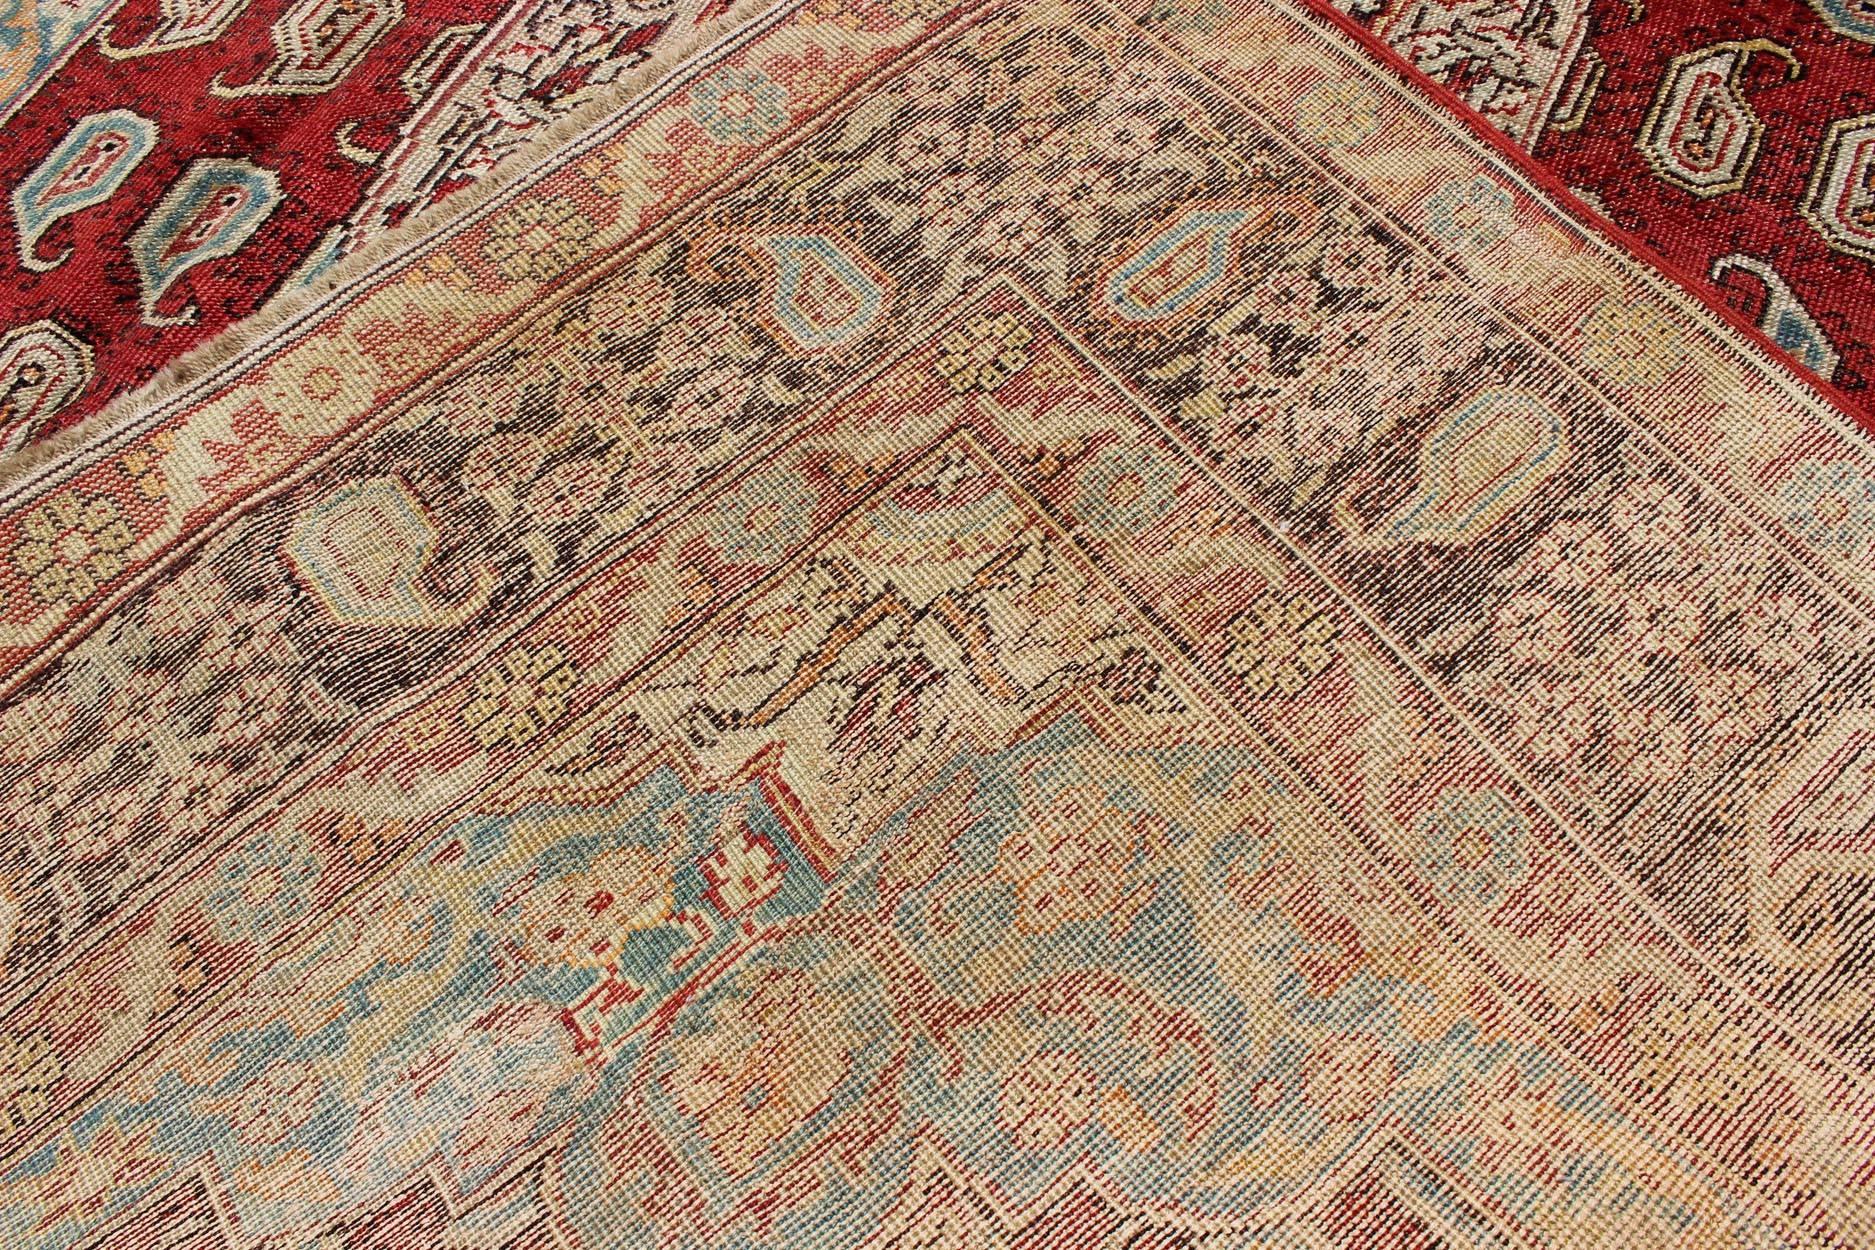 Antique Turkish Oushak Rug with Paisley Design in Red, Brown and Blue For Sale 2